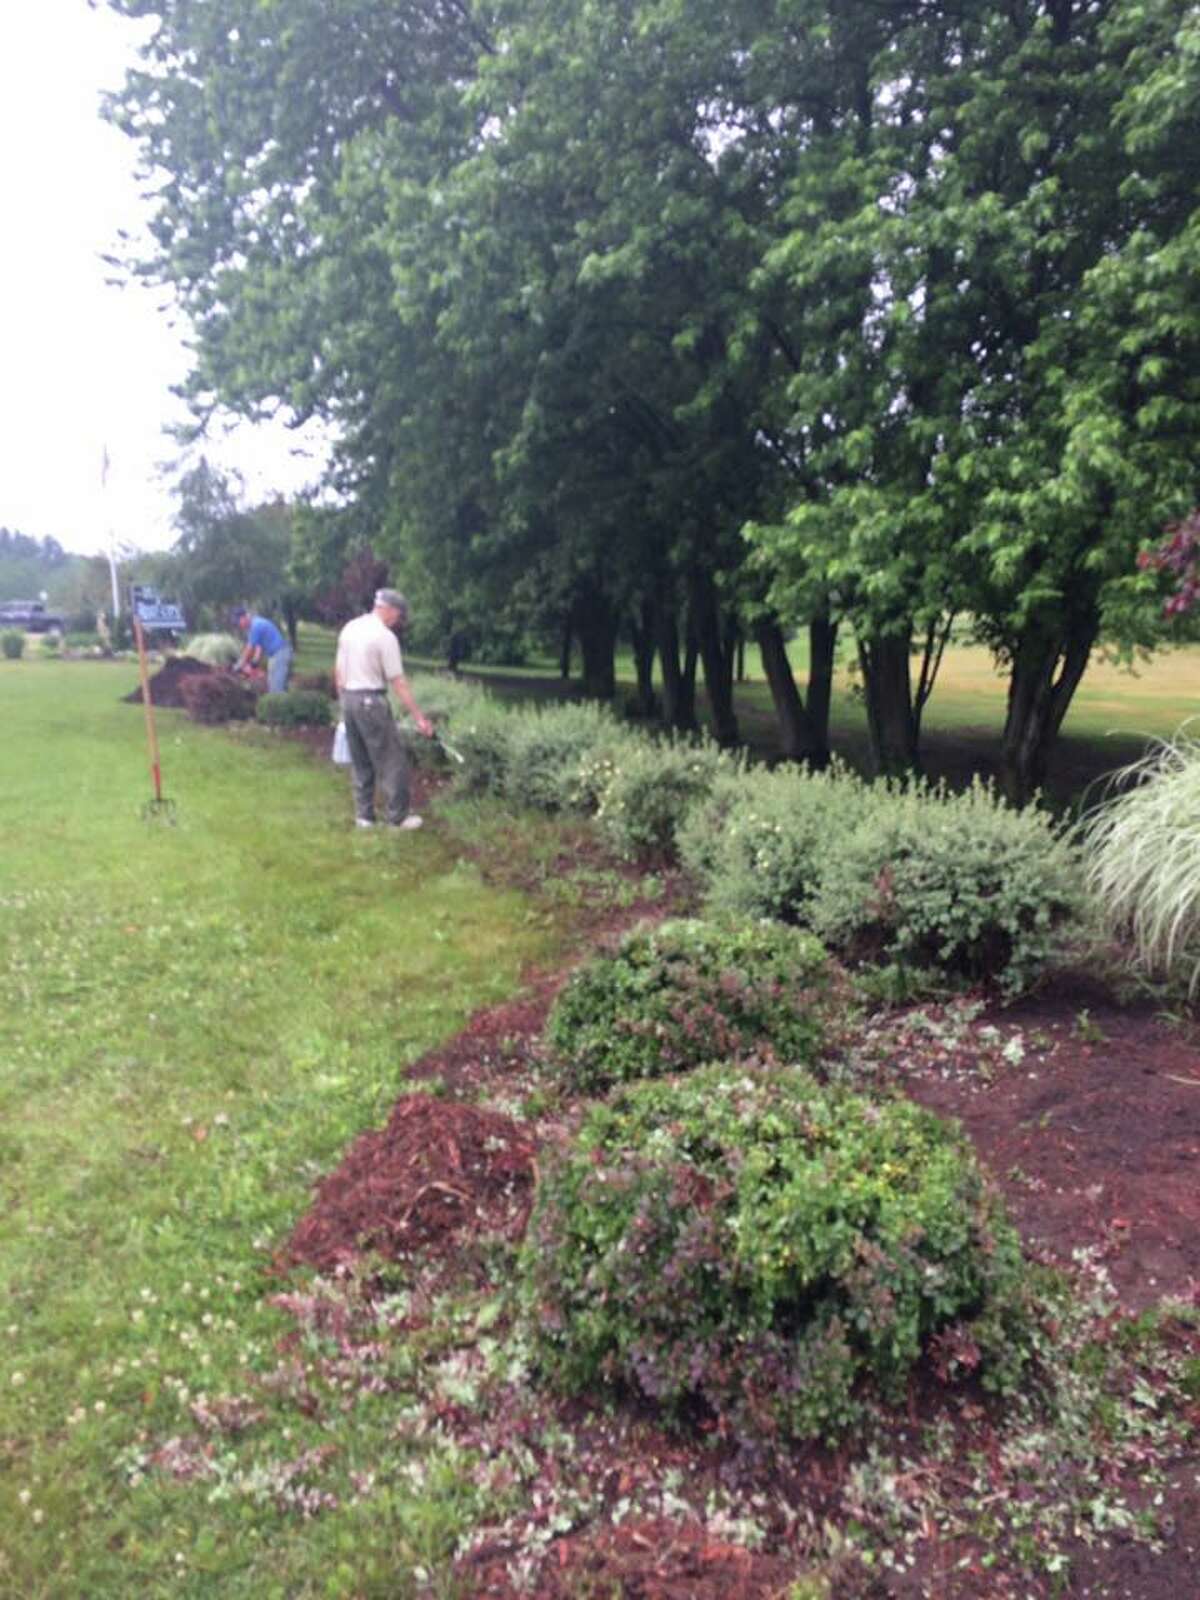 Refresh Reed City 2022 will take place this Saturday. Volunteers will clean up the city's flowerbeds, trails and parks, followed by a hot dog picnic sponsored by Ebel's General Store.